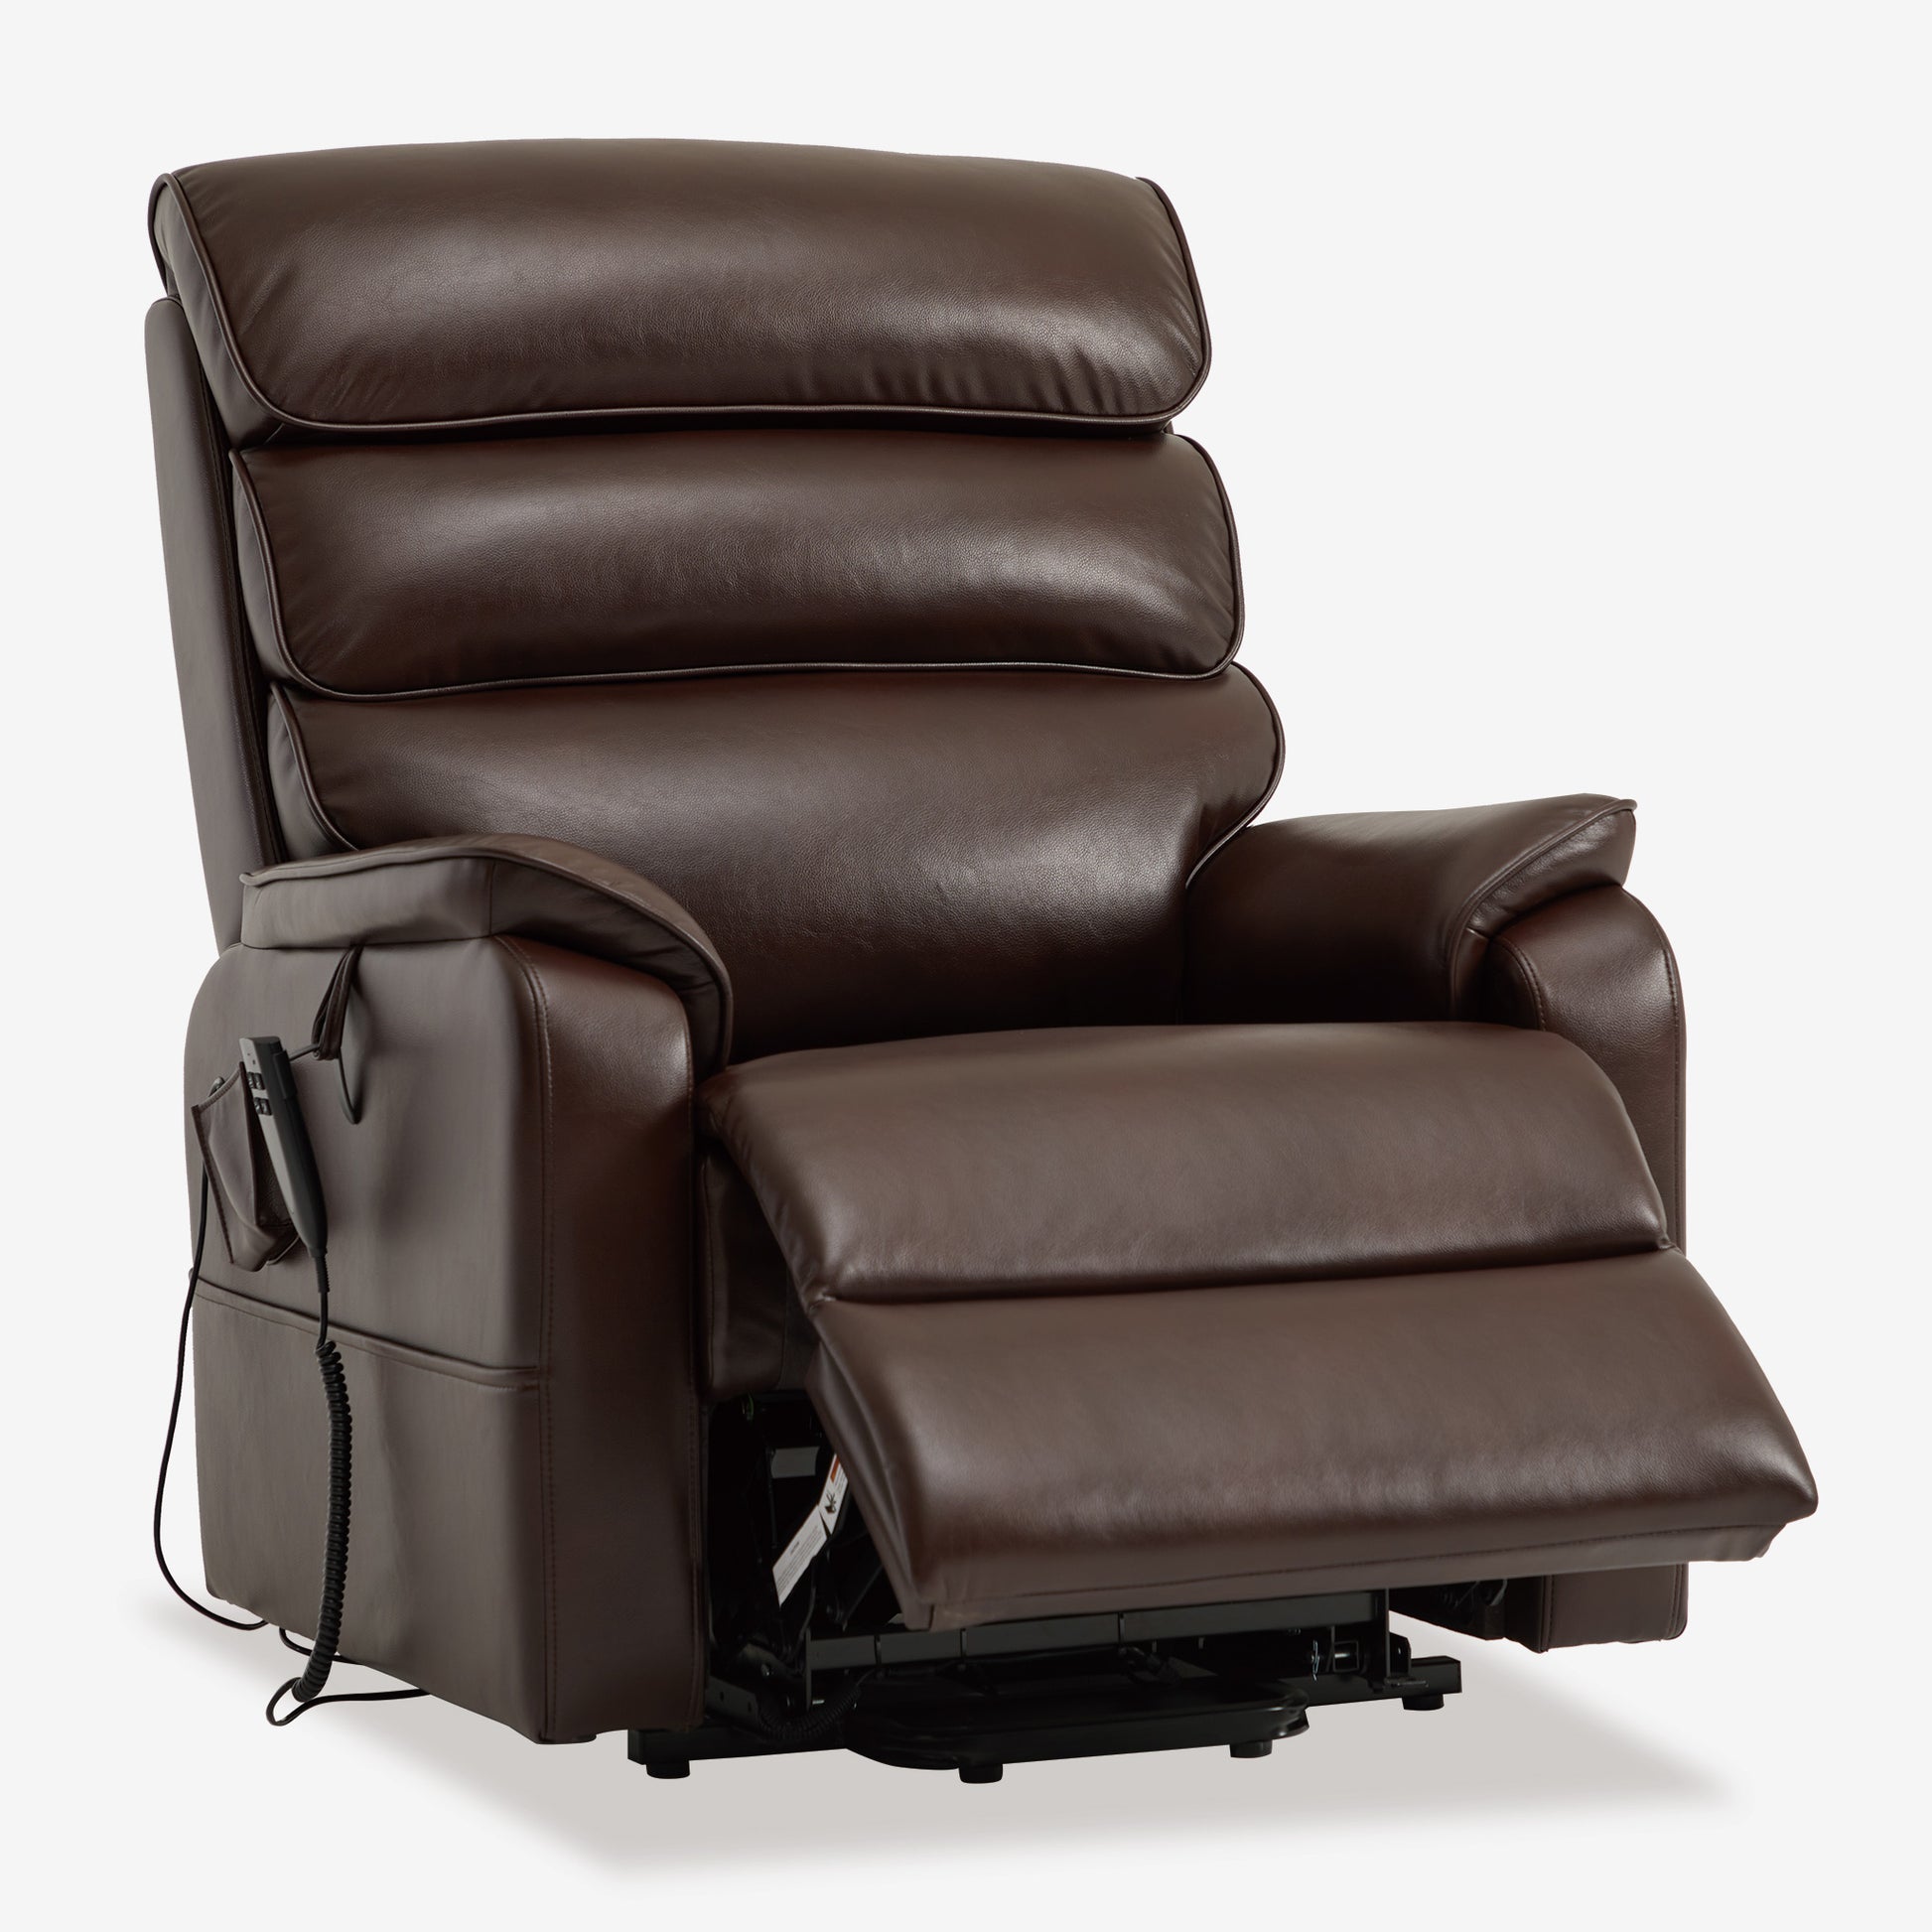 Oversized Lay Flat Recliner With Heat&massage And Infinite Positons